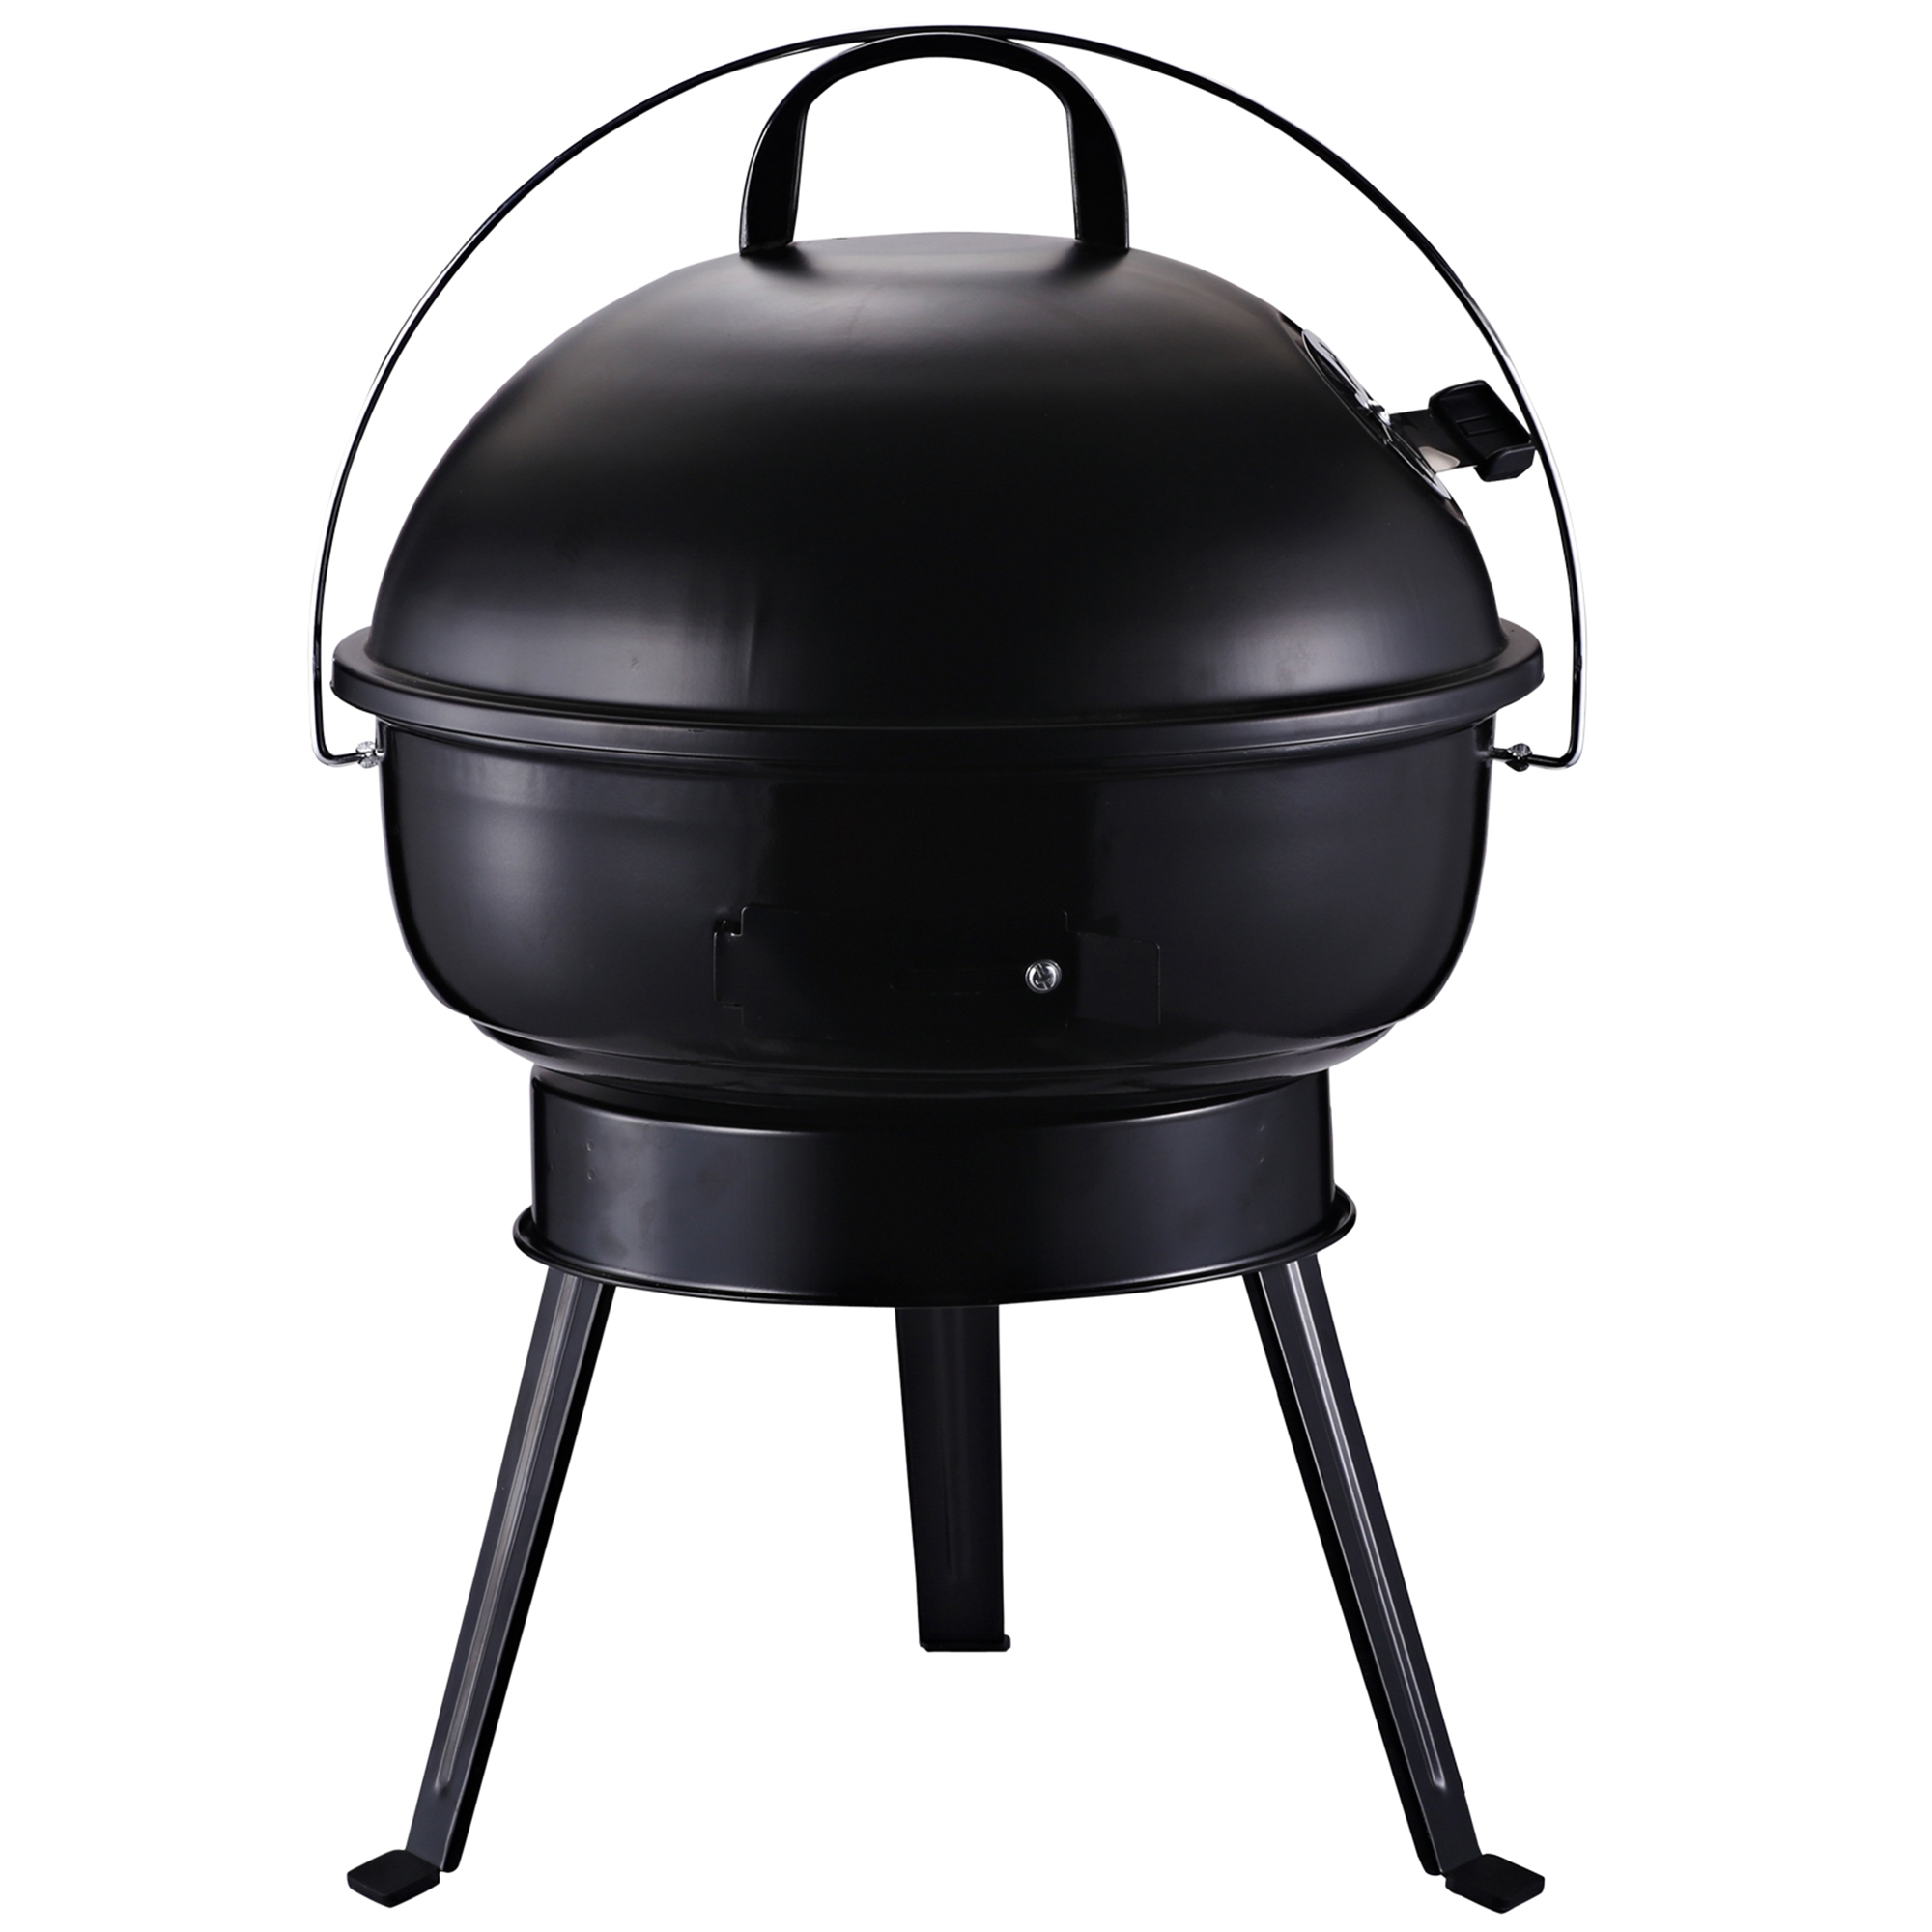 Outsunny Charcoal Bbq Charcoal Grill Metal Portable Tripod Grill Black